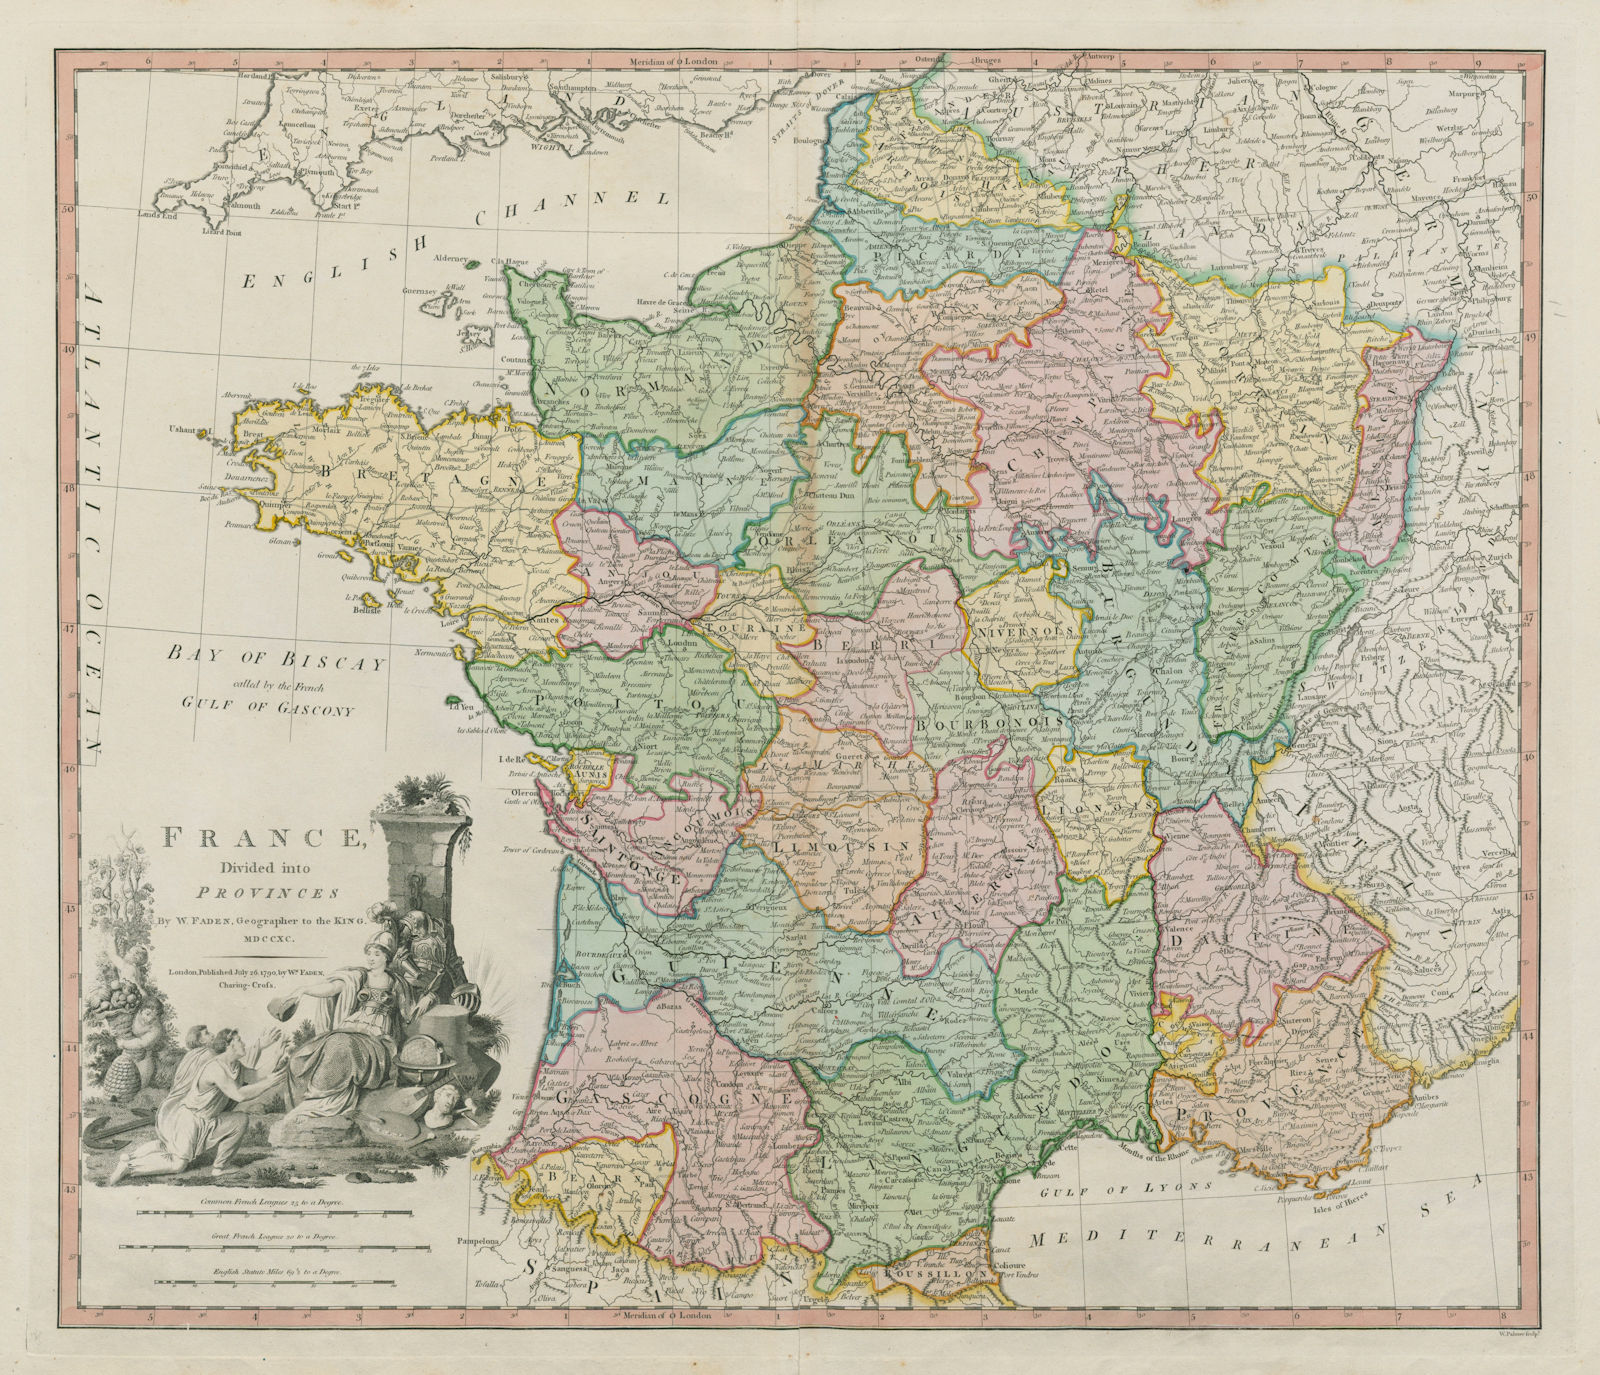 Associate Product France divided into Provinces. Pre-1790 revolution. FADEN 1790 old antique map